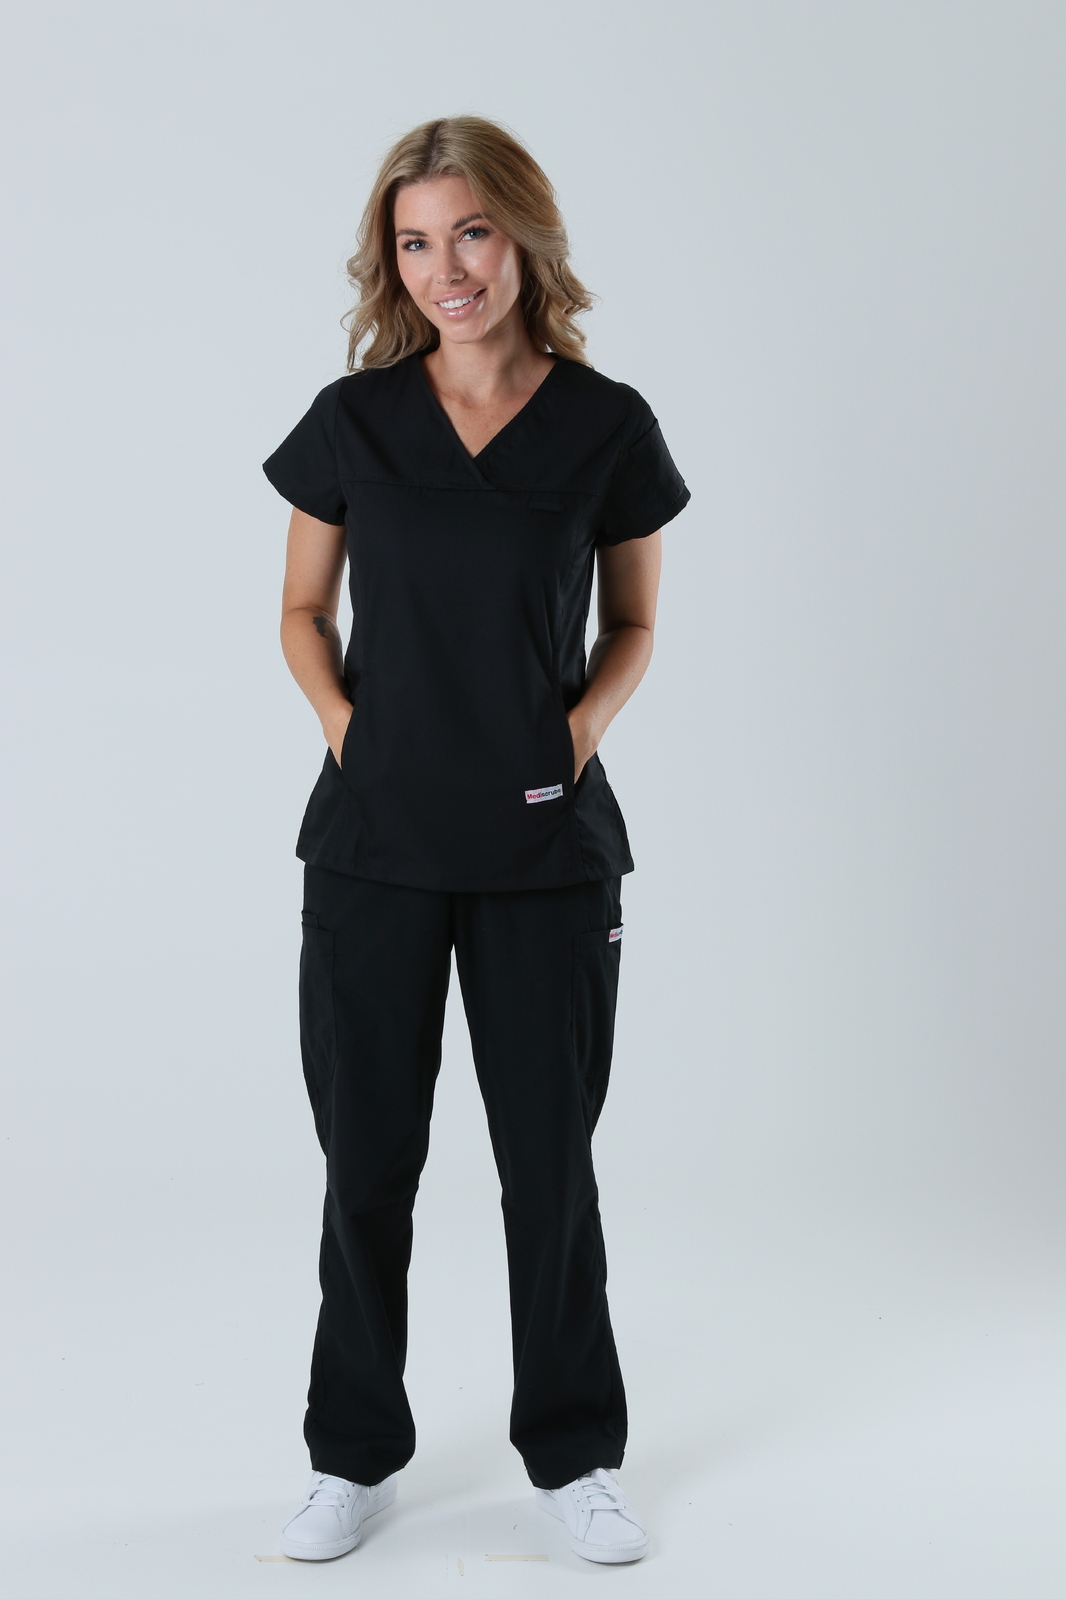 Townsville Hospital Emergency Department Clinical Nurse Uniform Set Bundle (Women's Fit Solid and Cargo Pants in Black incl Logos